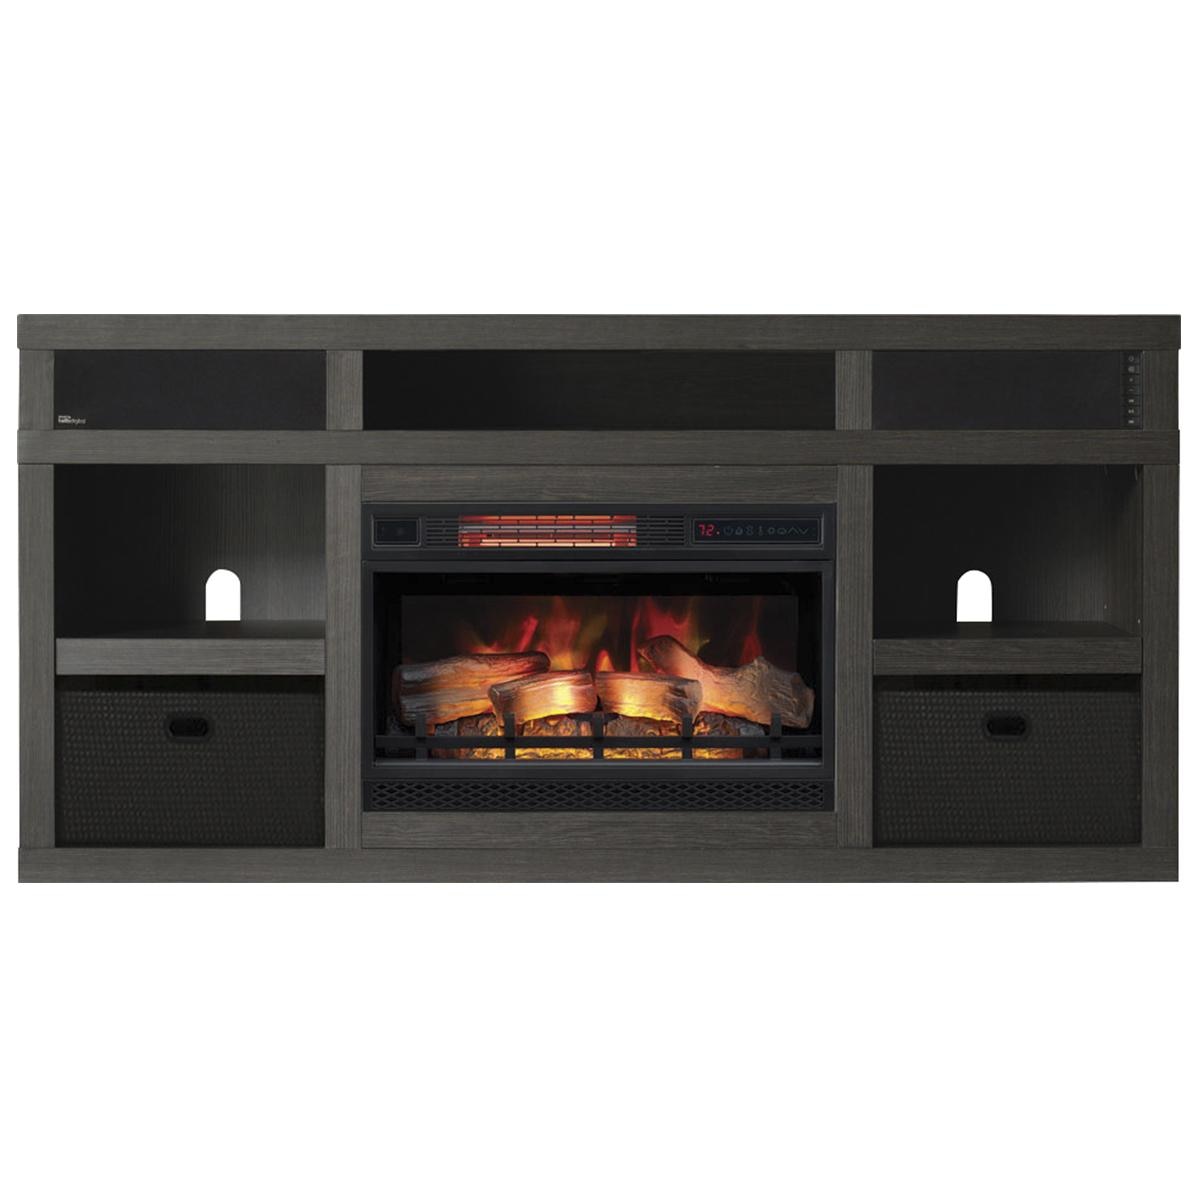 Contemporary Gas Fireplace Awesome Fabio Flames Greatlin 3 Piece Fireplace Entertainment Wall